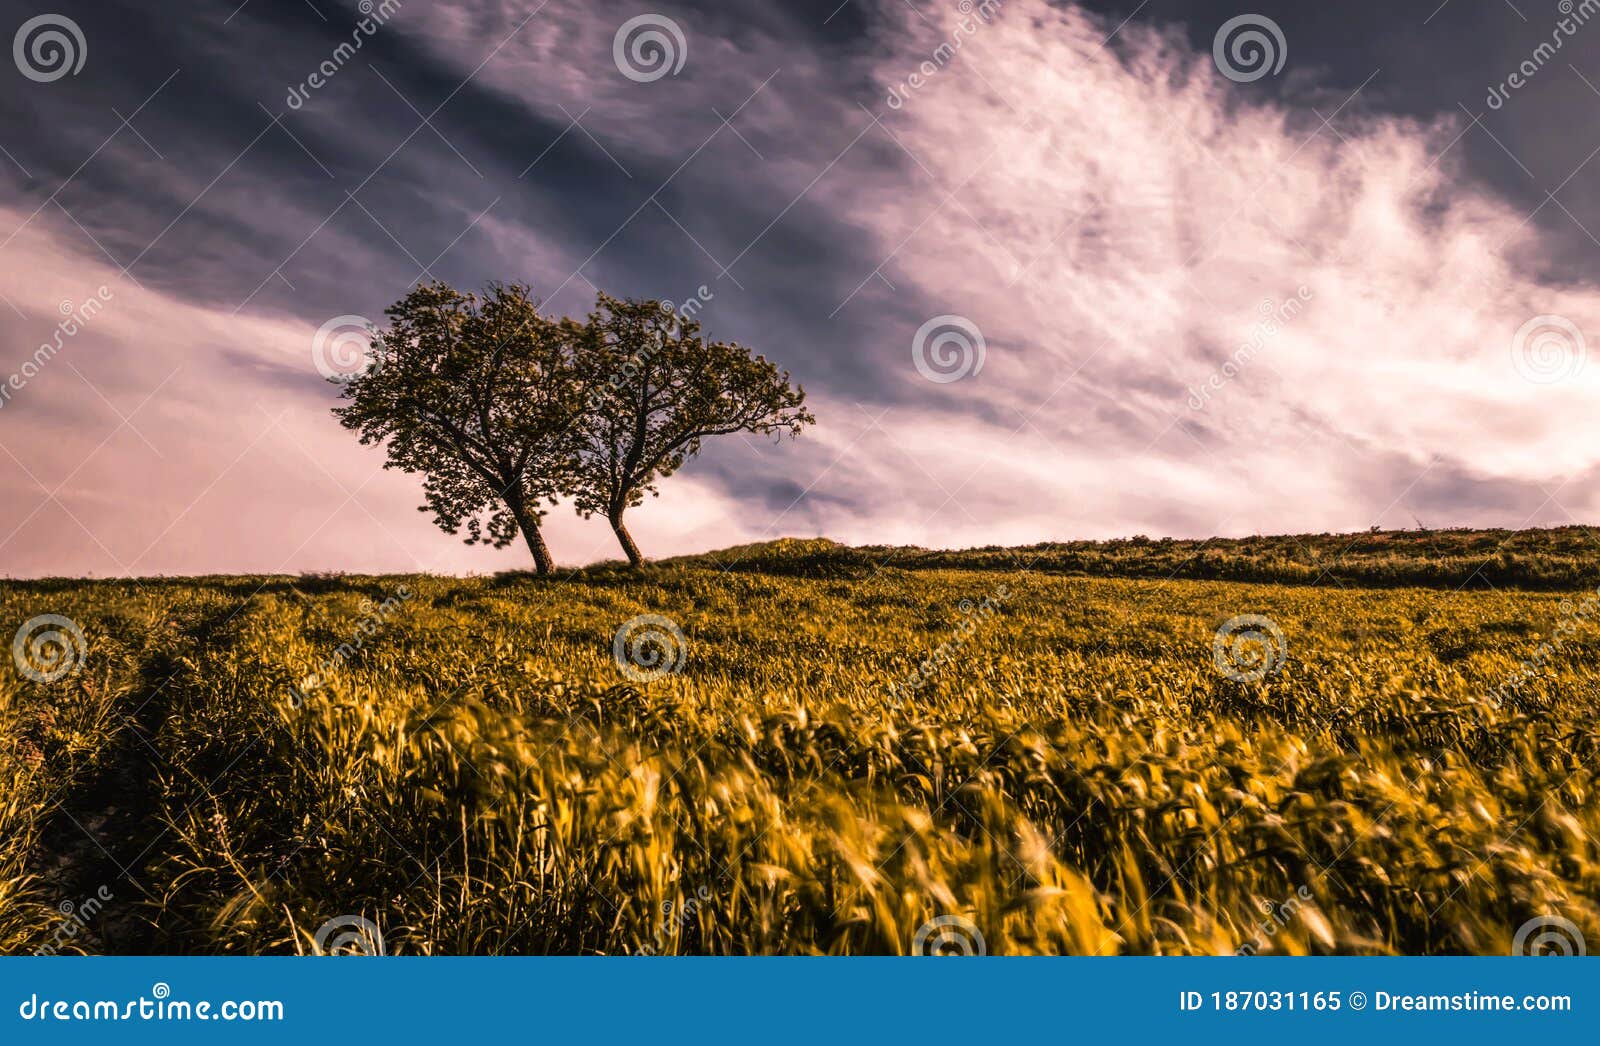 lonely tree in the presence of cloudy sky